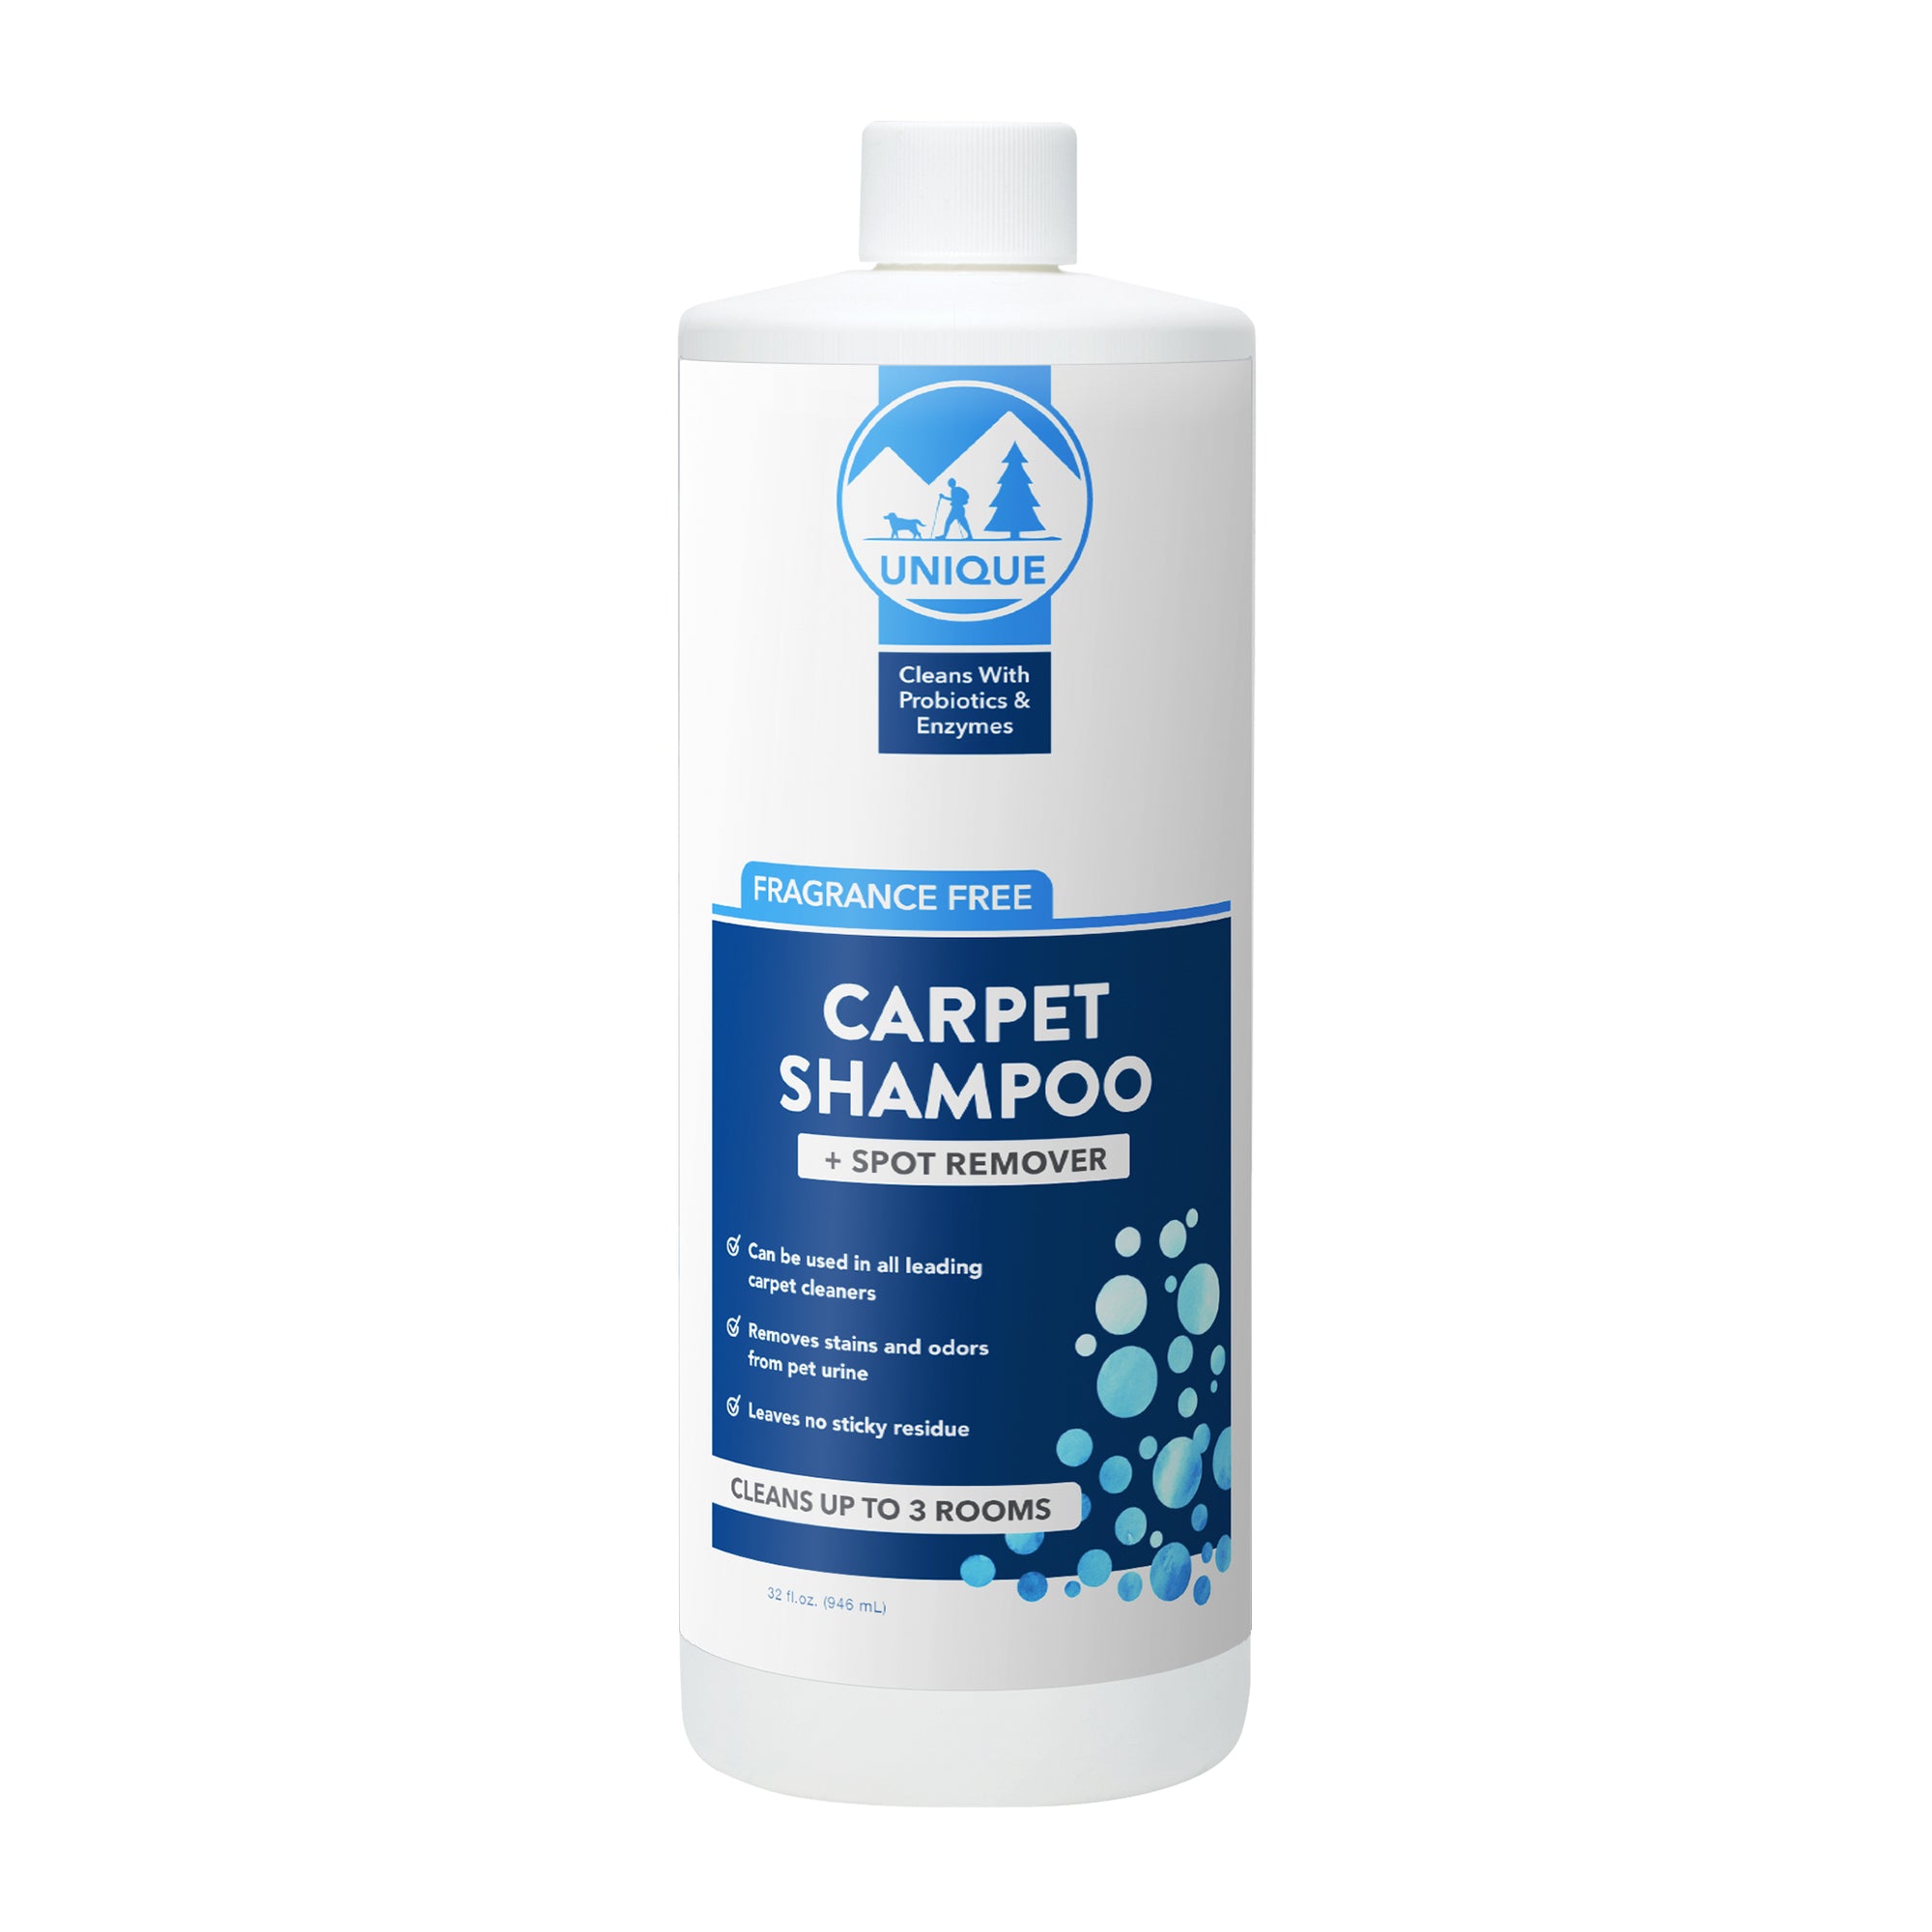 Unique Carpet Shampoo 32 oz. treats spots and stains formulated with trust, bacteria based.